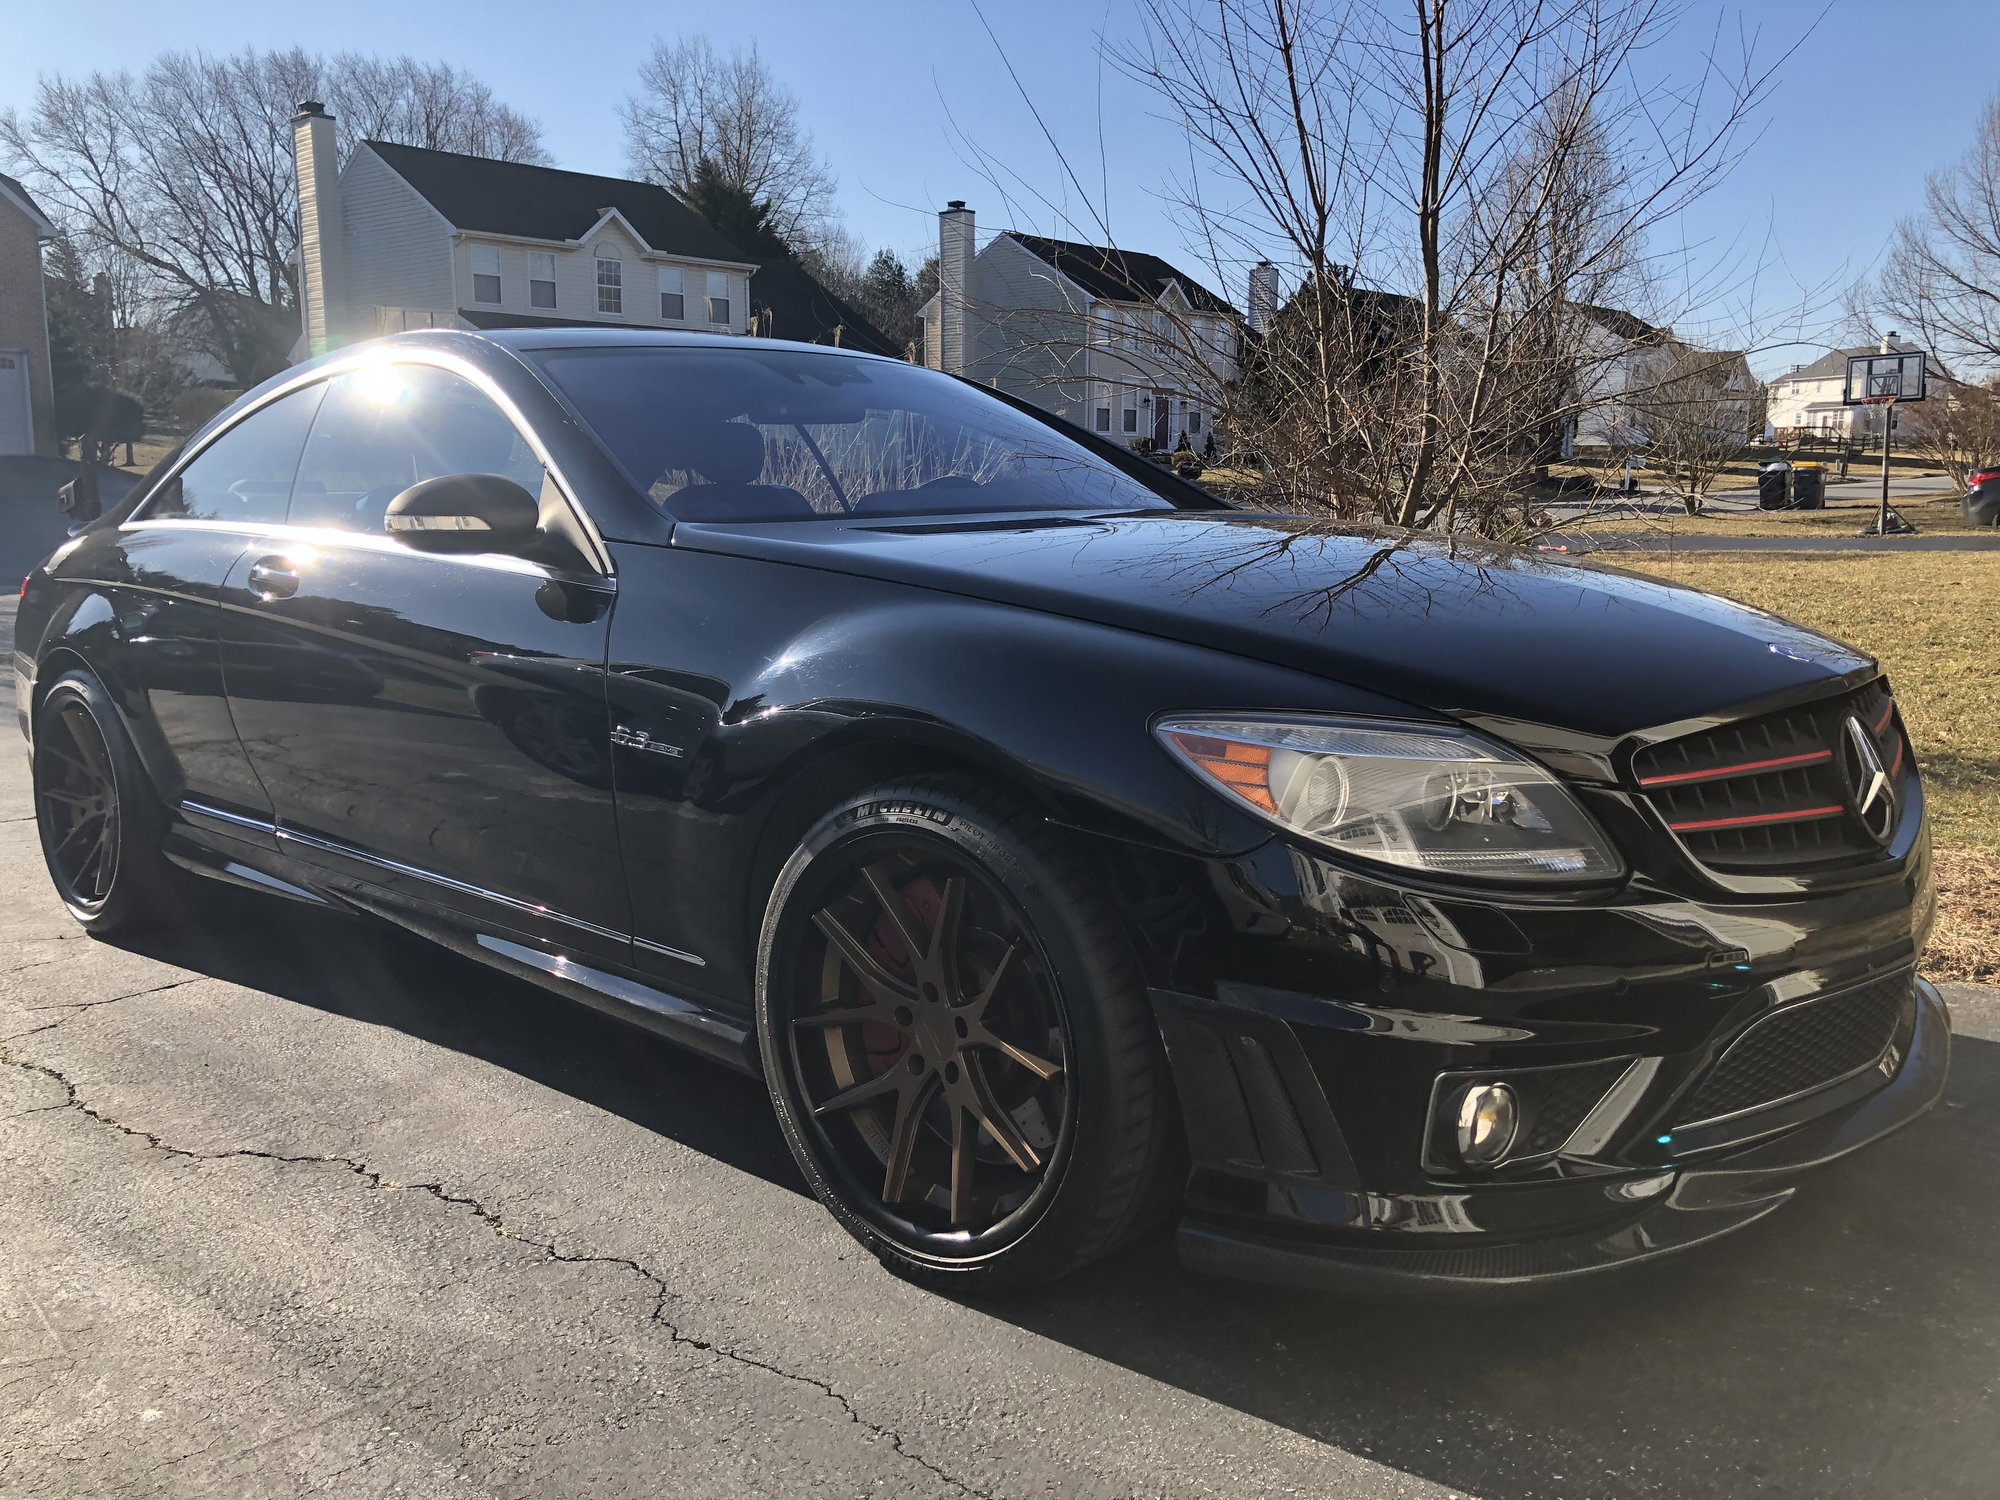 2008 Mercedes-Benz CL63 AMG - 2008 CL63 AMG for sale - Used - VIN Wddej77x38a015490 - 77,000 Miles - 8 cyl - 2WD - Automatic - Coupe - Black - Bear, DE 19701, United States